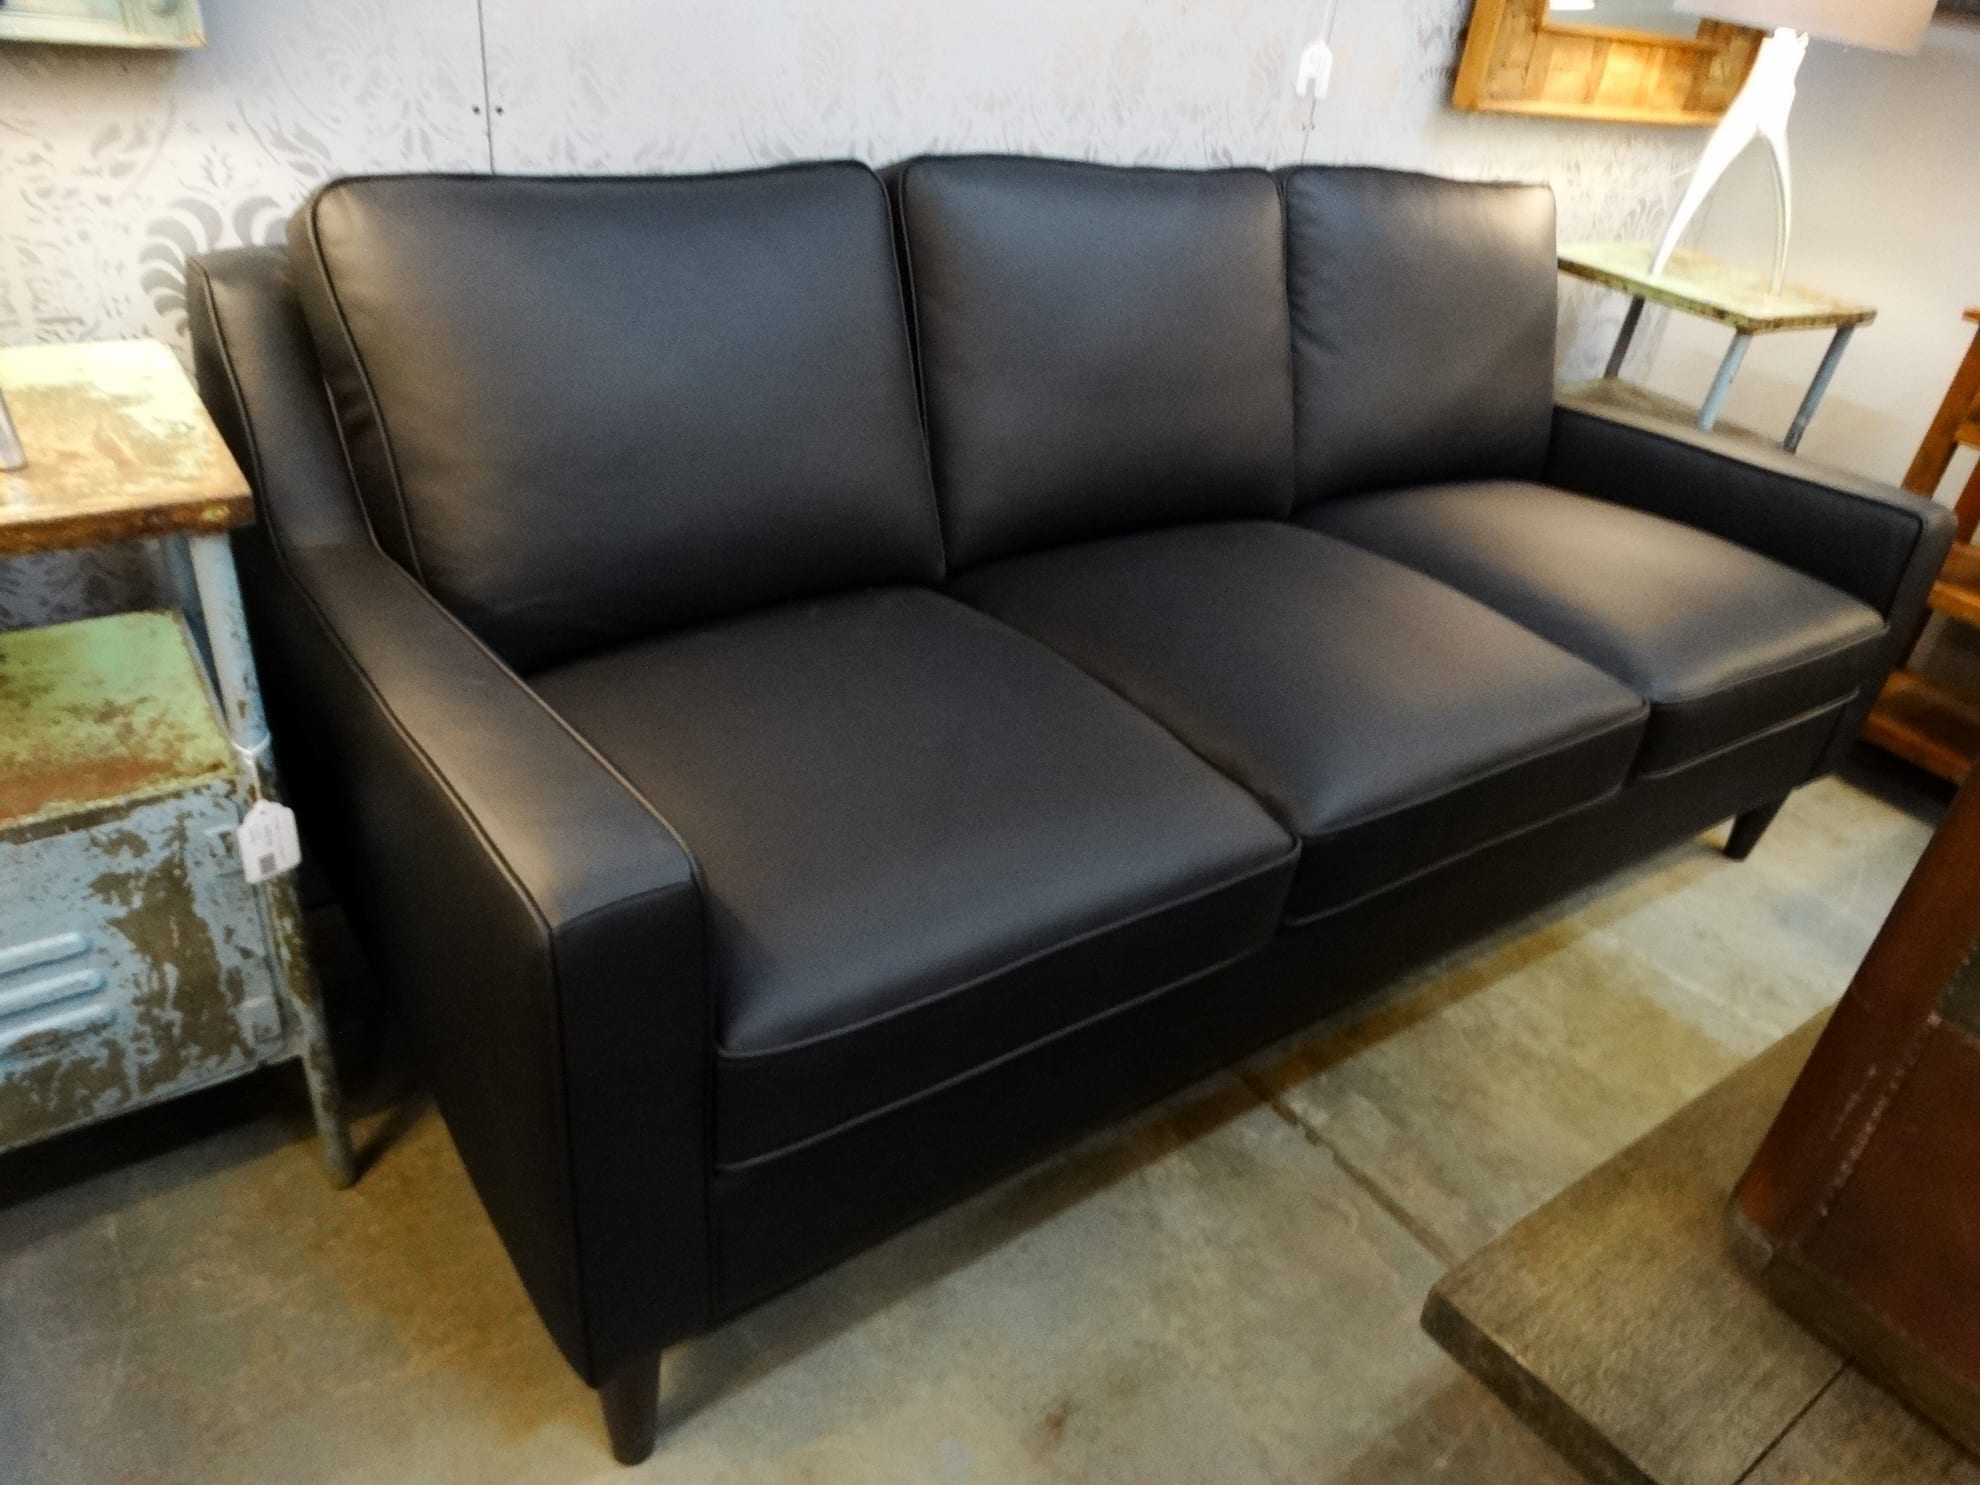 Elegant Black Leather Sofa Couch Has A, Interior Design Black Leather Couch